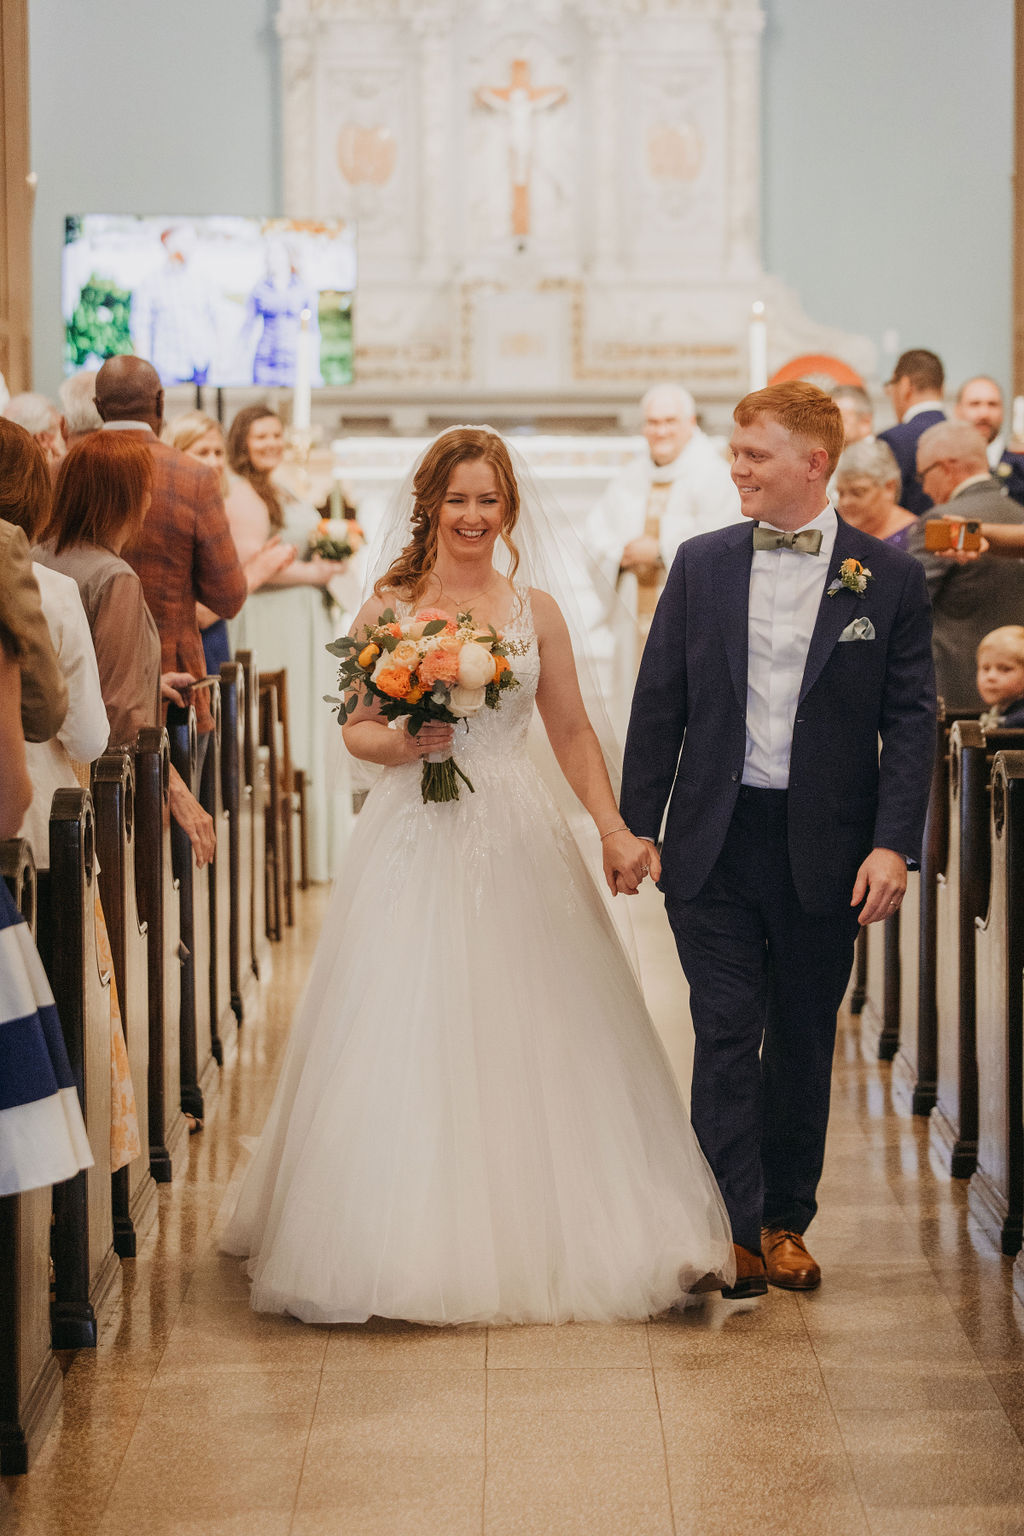 bride and groom recessional after wedding ceremony at Saint Monica Catholic Church